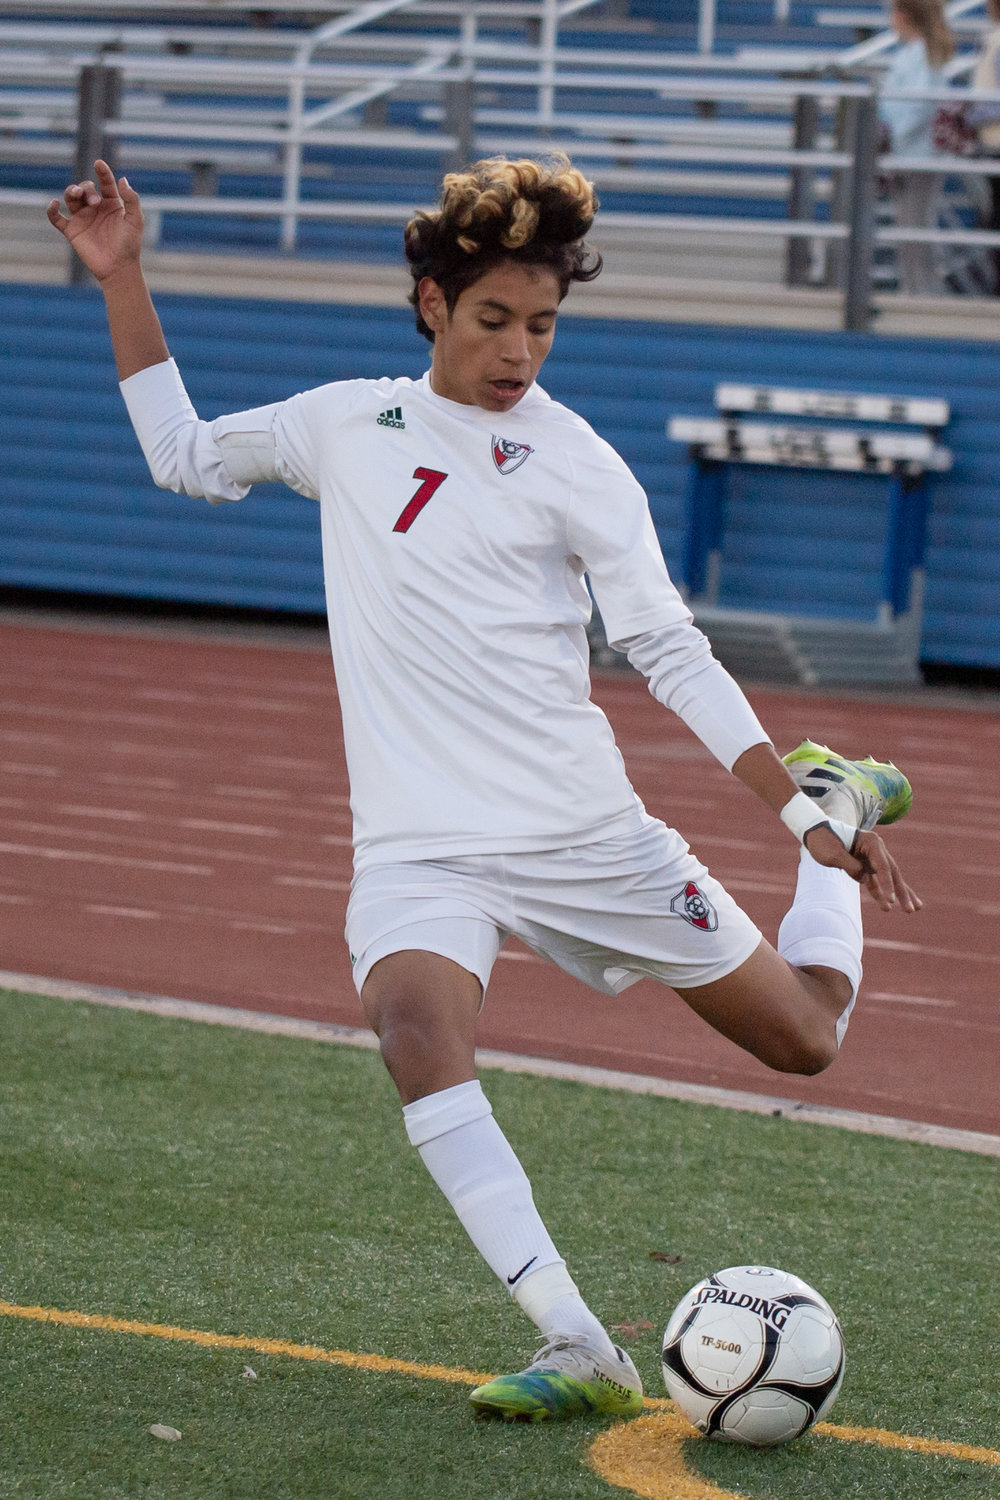 Senior Chrystian Hernandez had a huge season for Glen Cove with 9 goals and 18 assists.